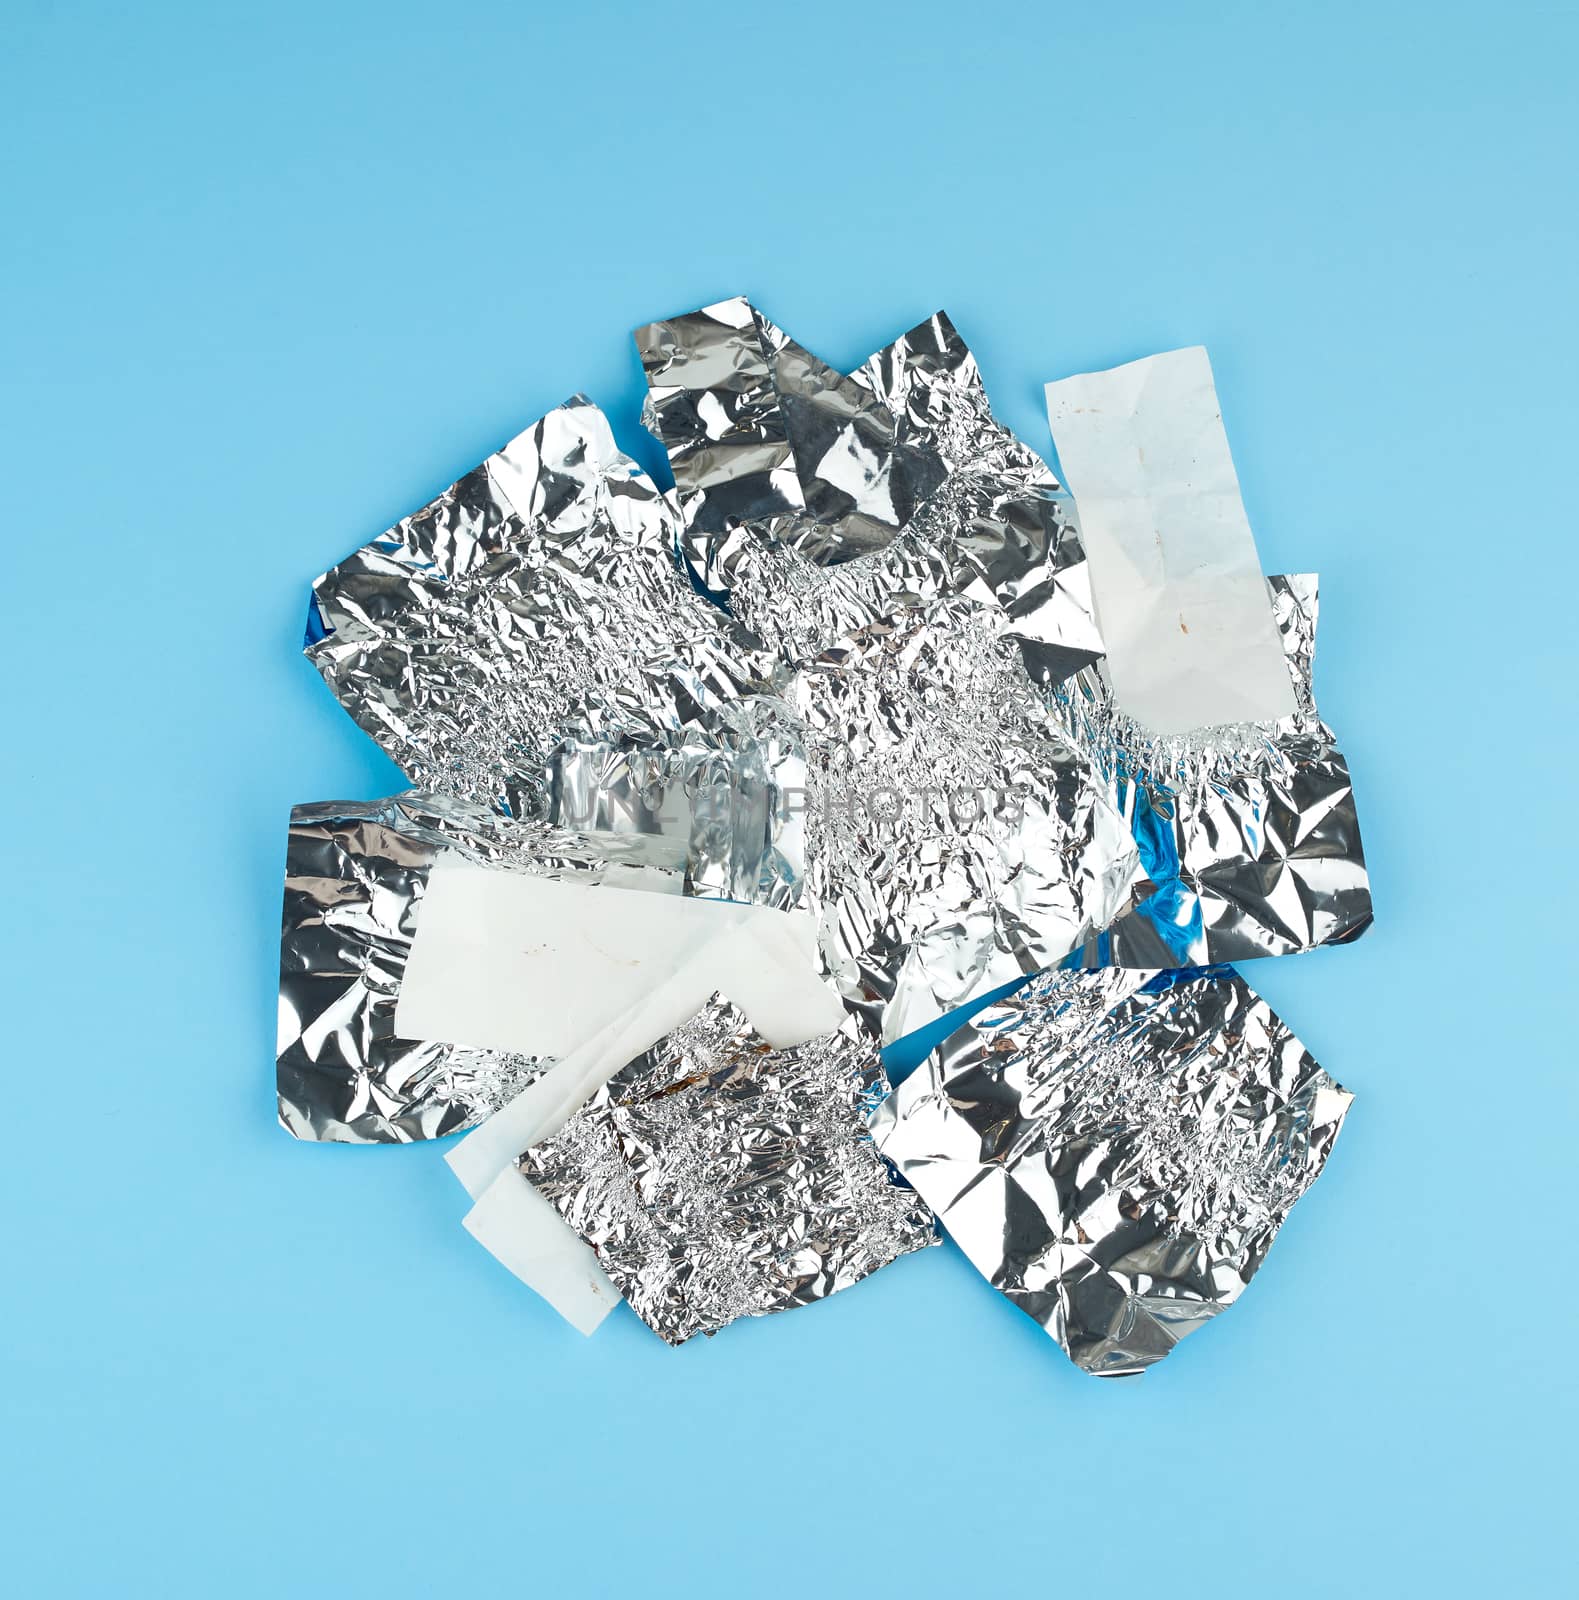 various crumpled white paper and foil used candy wrappers on a blue background, top view